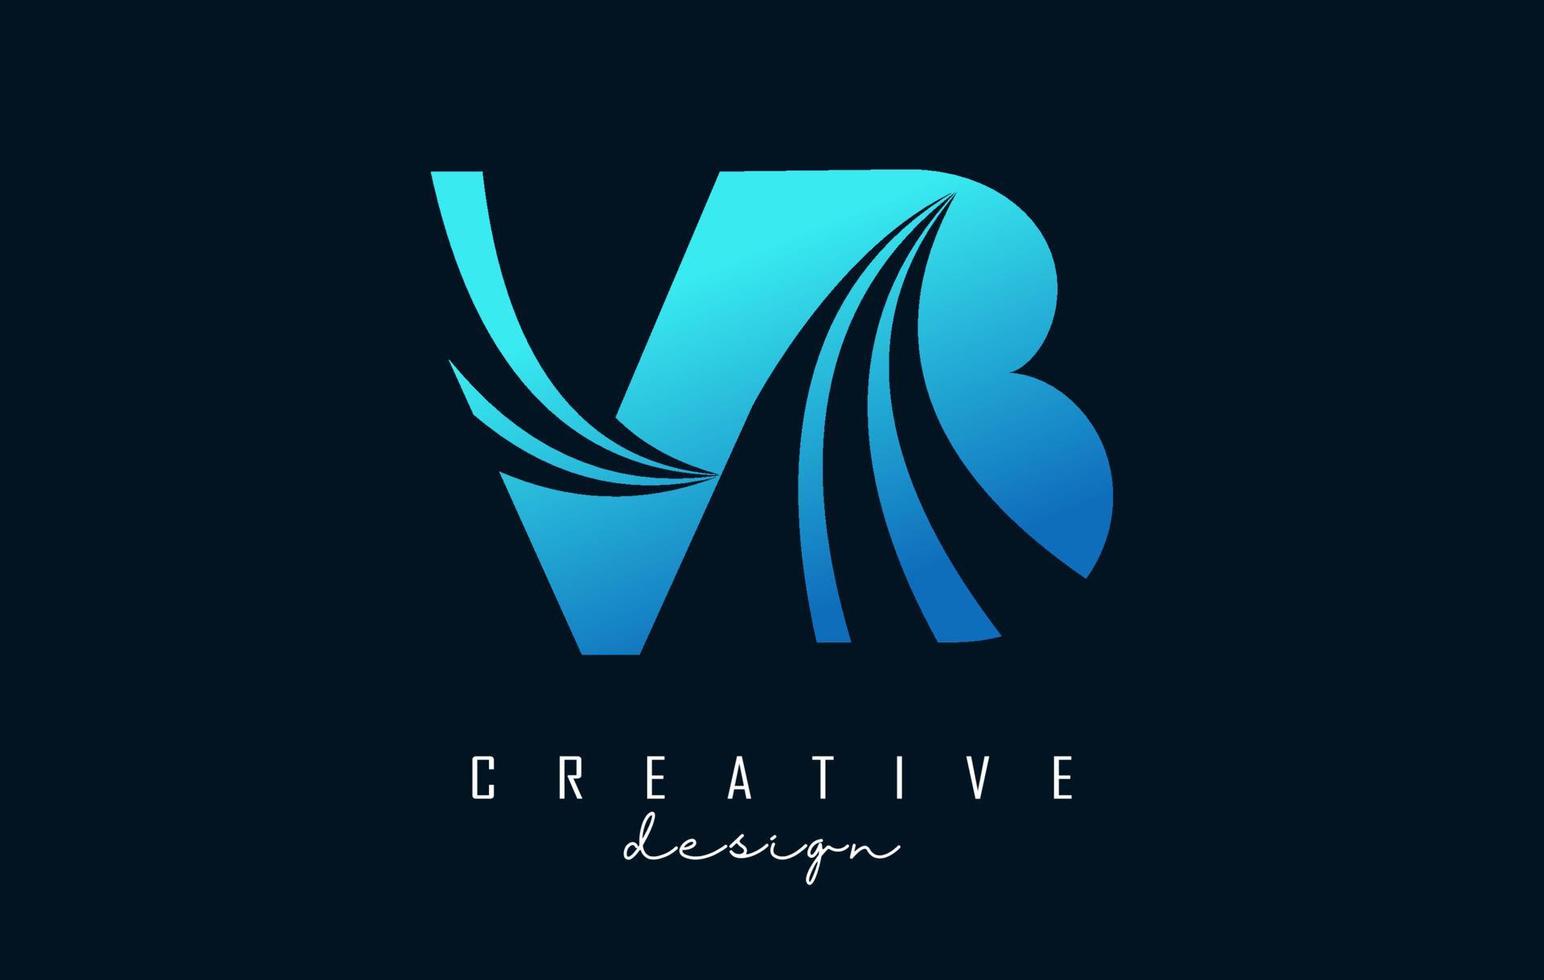 Creative blue letters VB v b logo with leading lines and road concept design. Letters with geometric design. vector